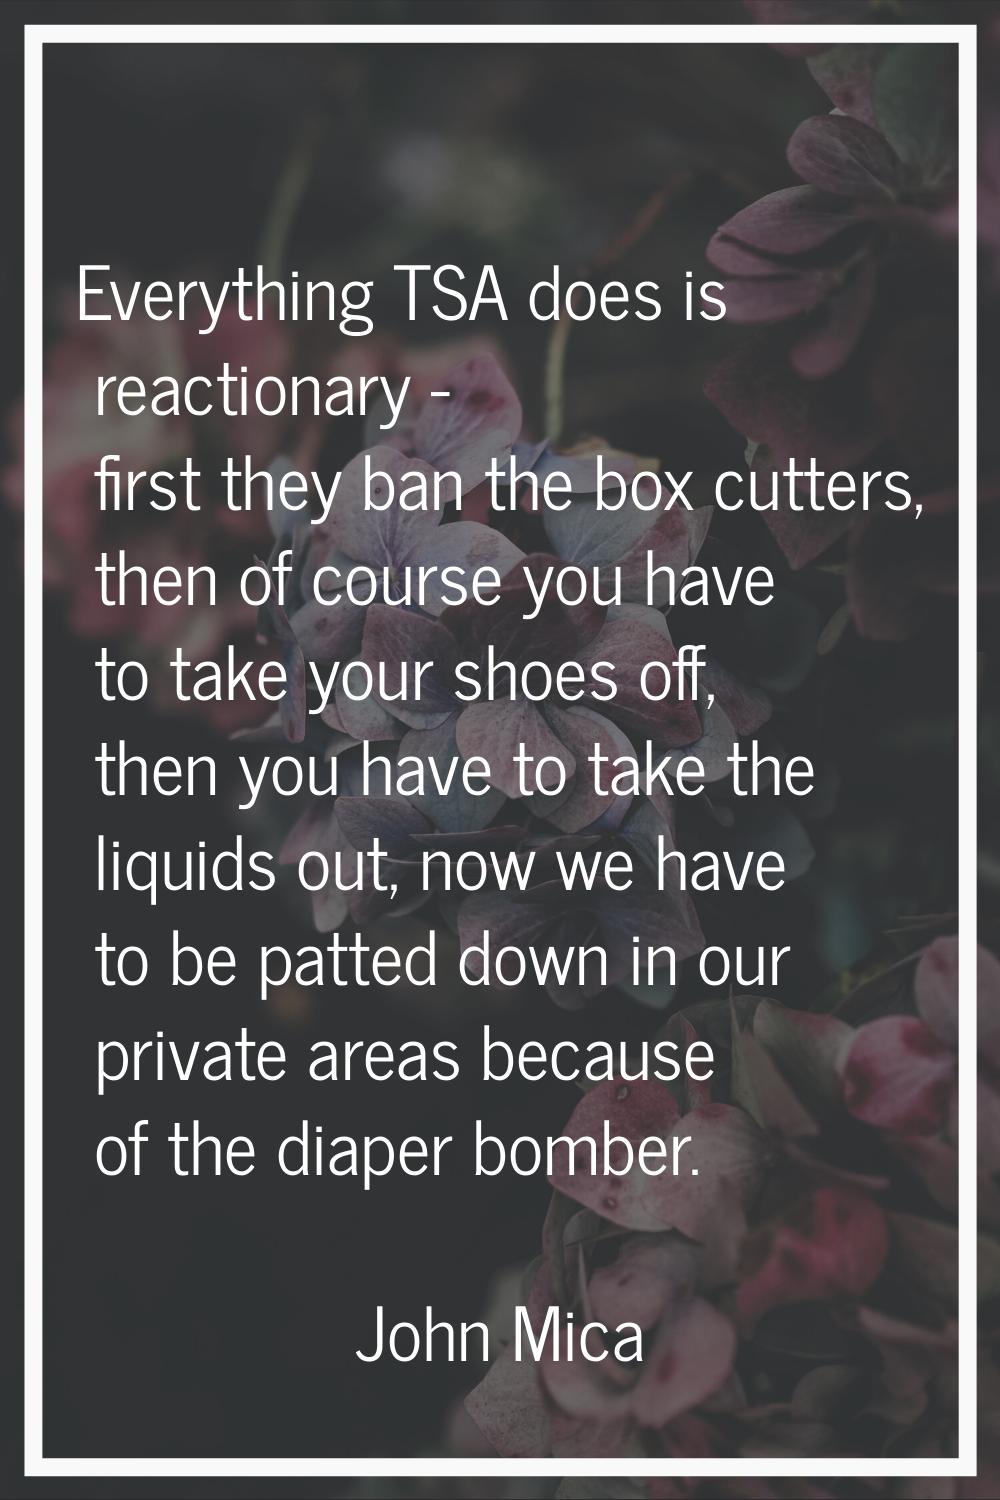 Everything TSA does is reactionary - first they ban the box cutters, then of course you have to tak